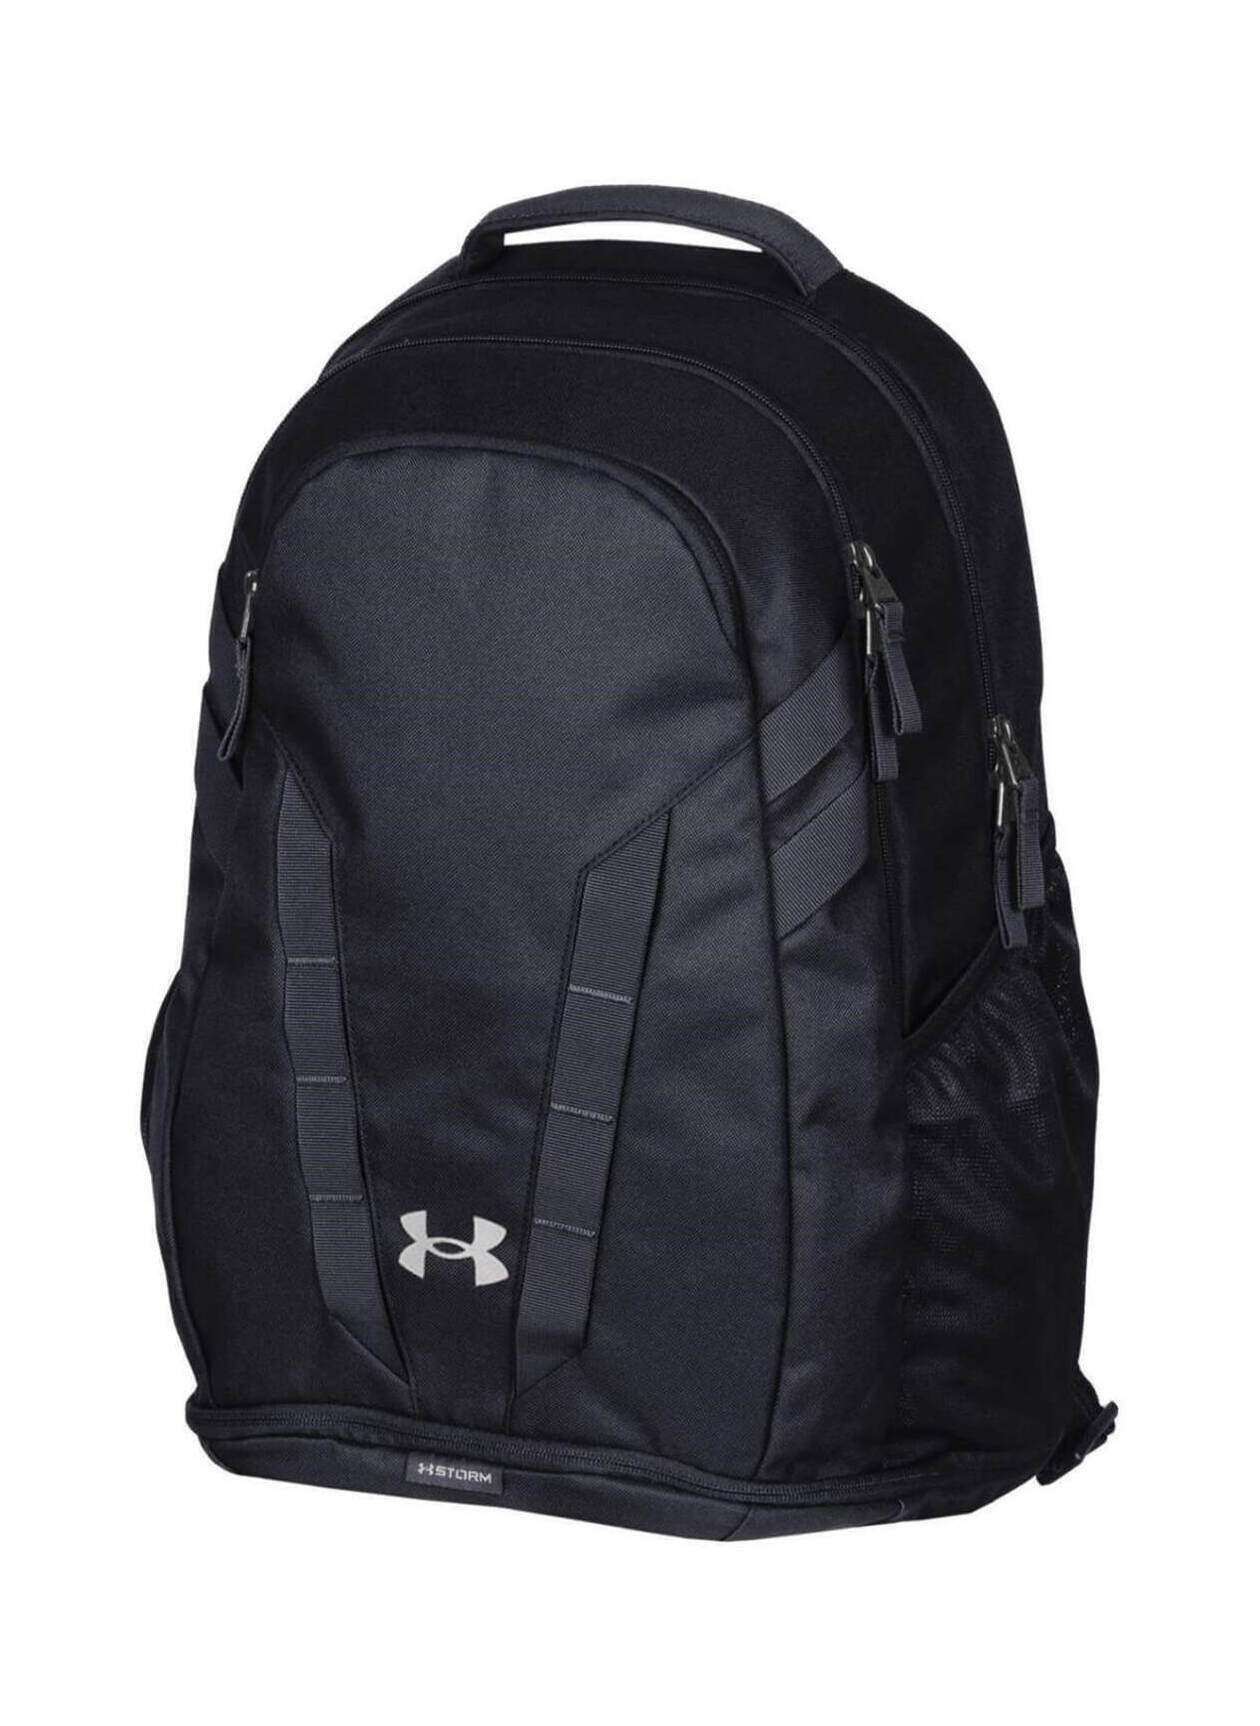 Under Armour Black Hustle 5.0 Backpack | Company Bags